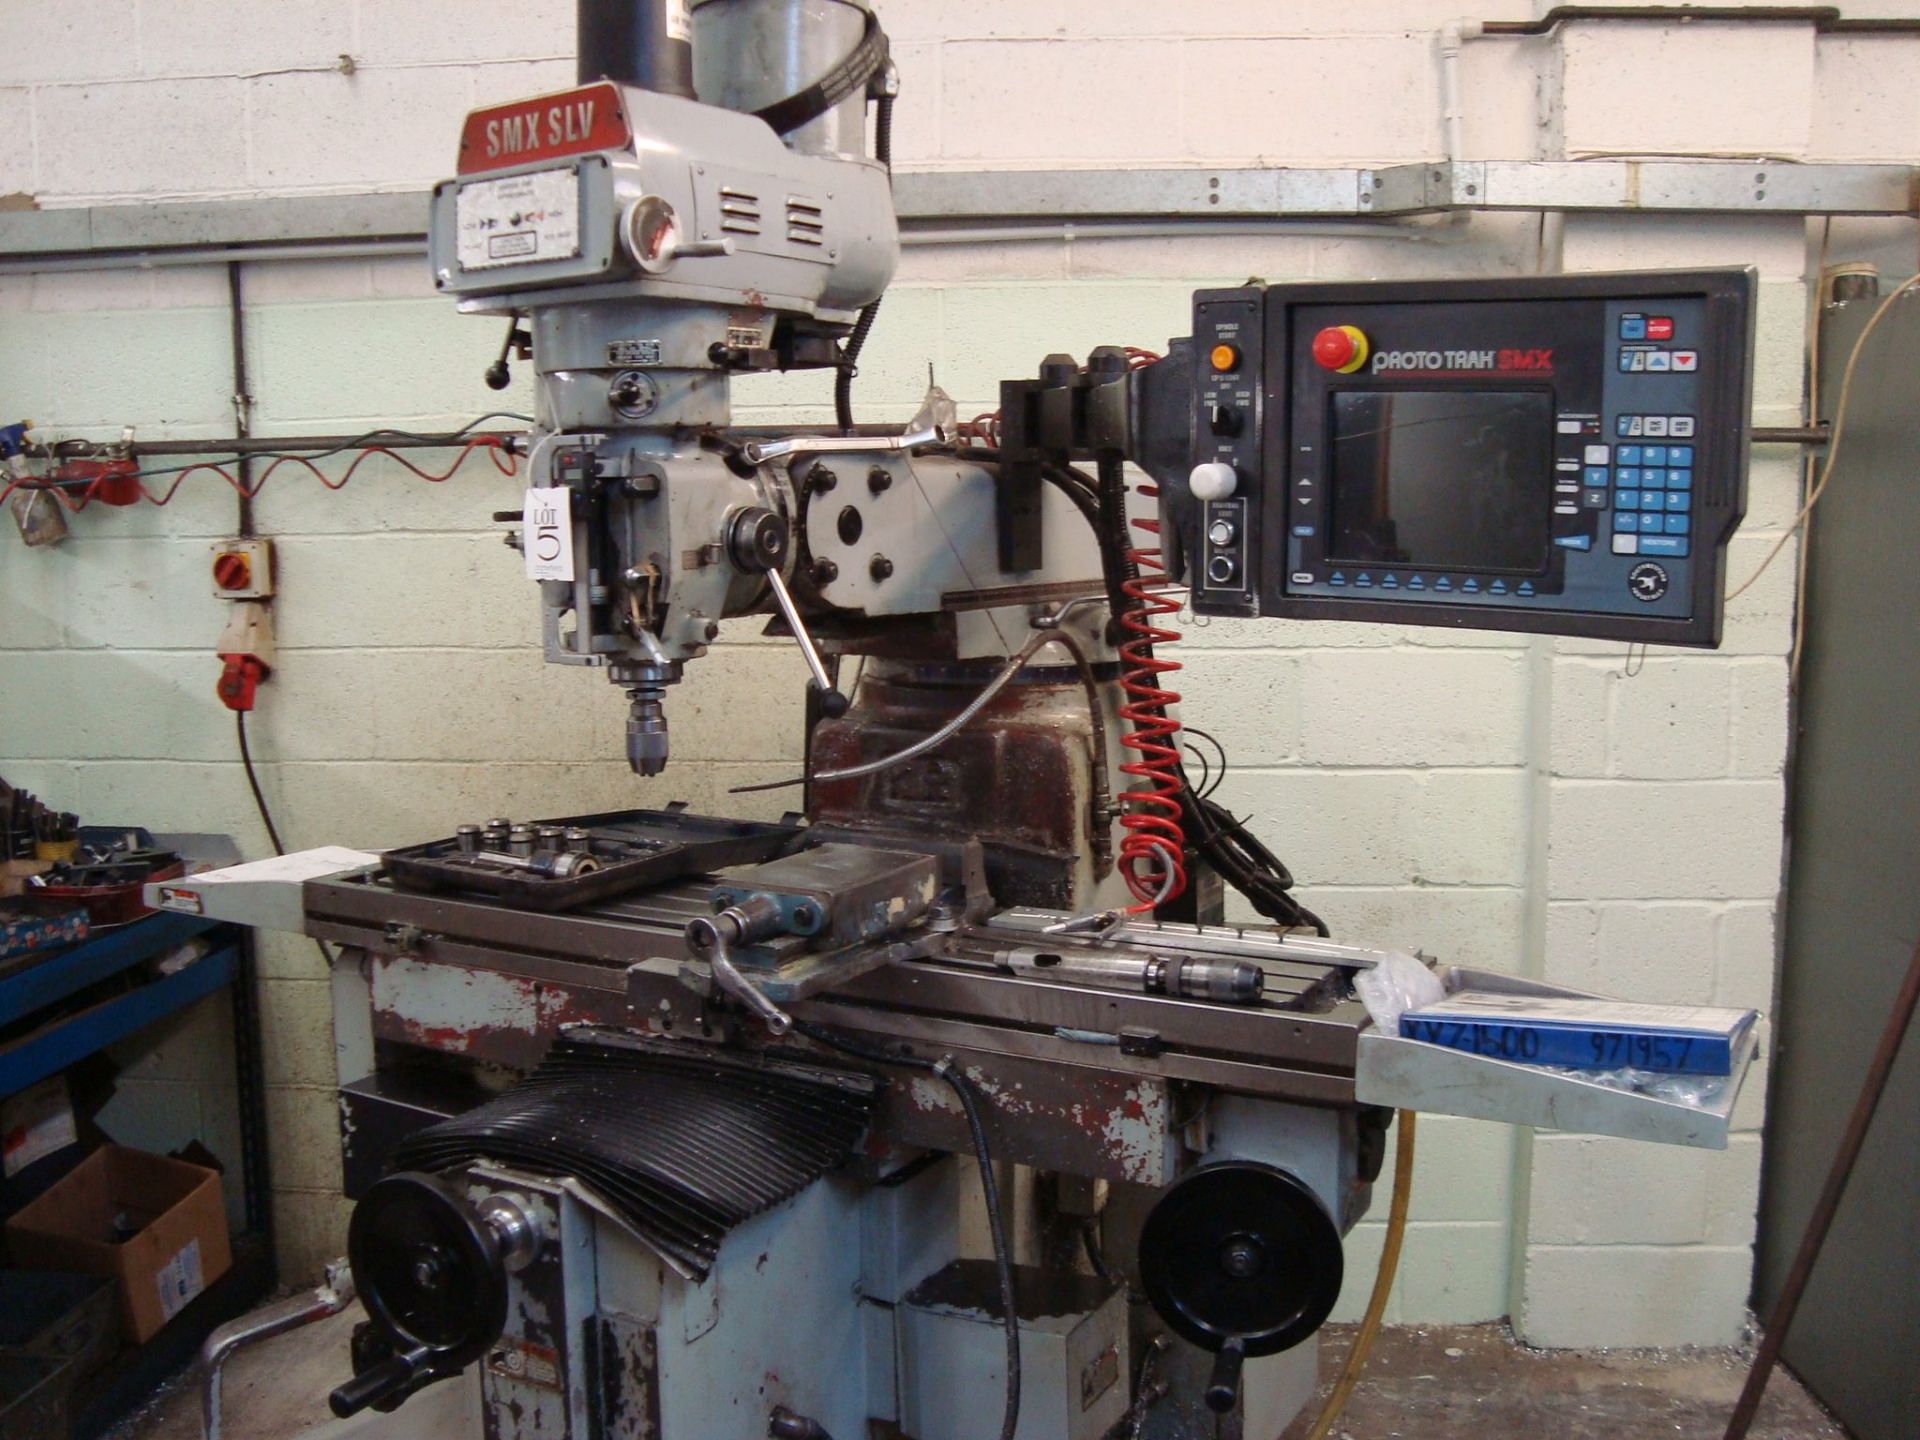 An XYZ SMX SLV vertical milling machine Serial number 10817 with ProtoTrak SMX control system, - Image 3 of 3